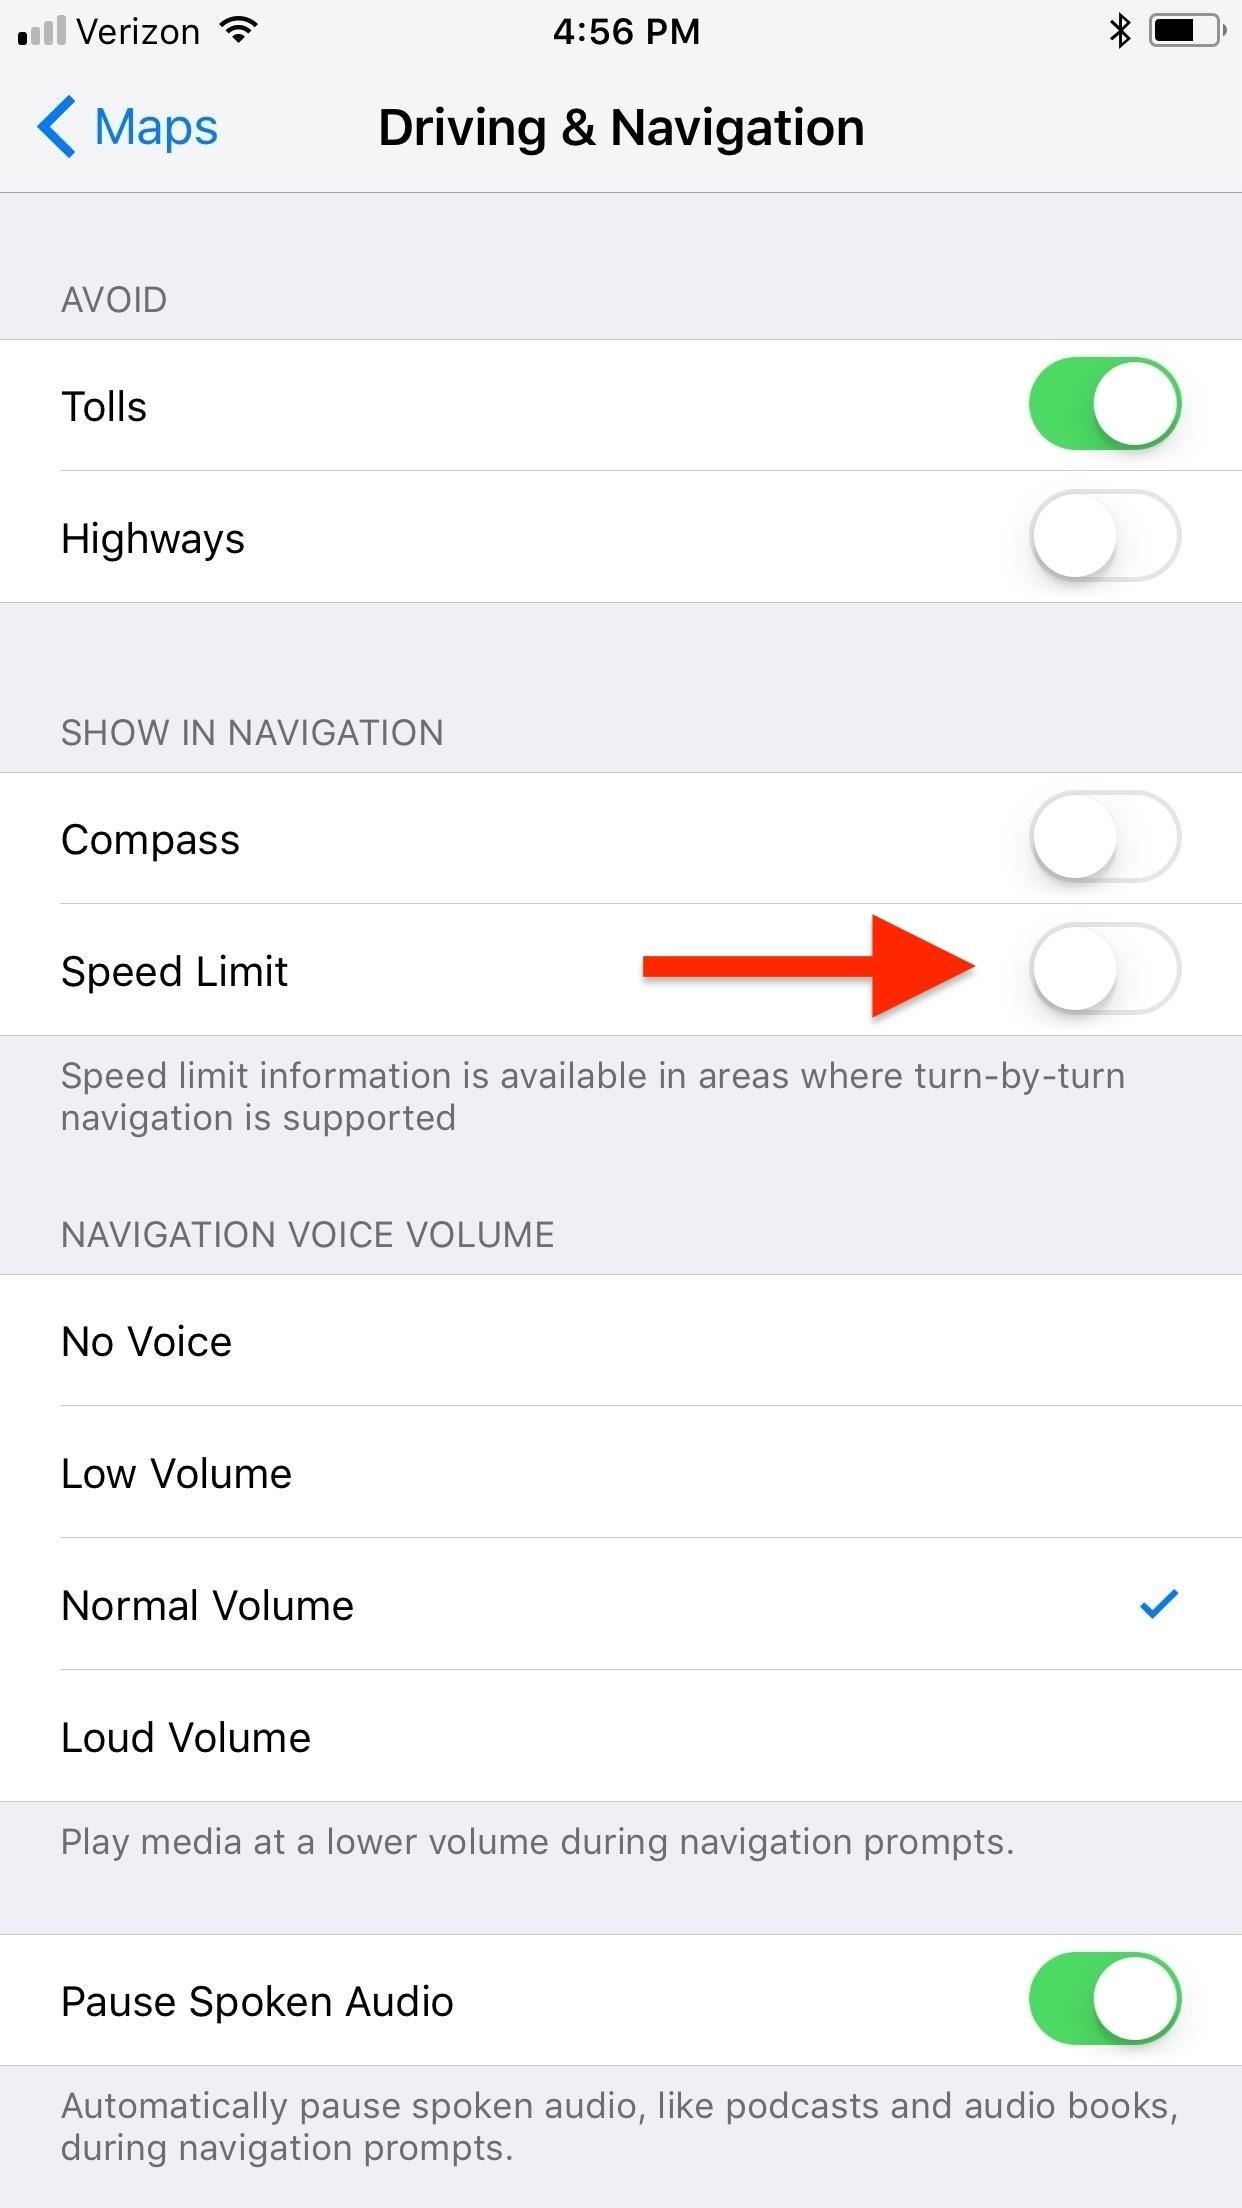 How to Turn Off the Speed Limit Indicator in Maps for iPhone in iOS 11